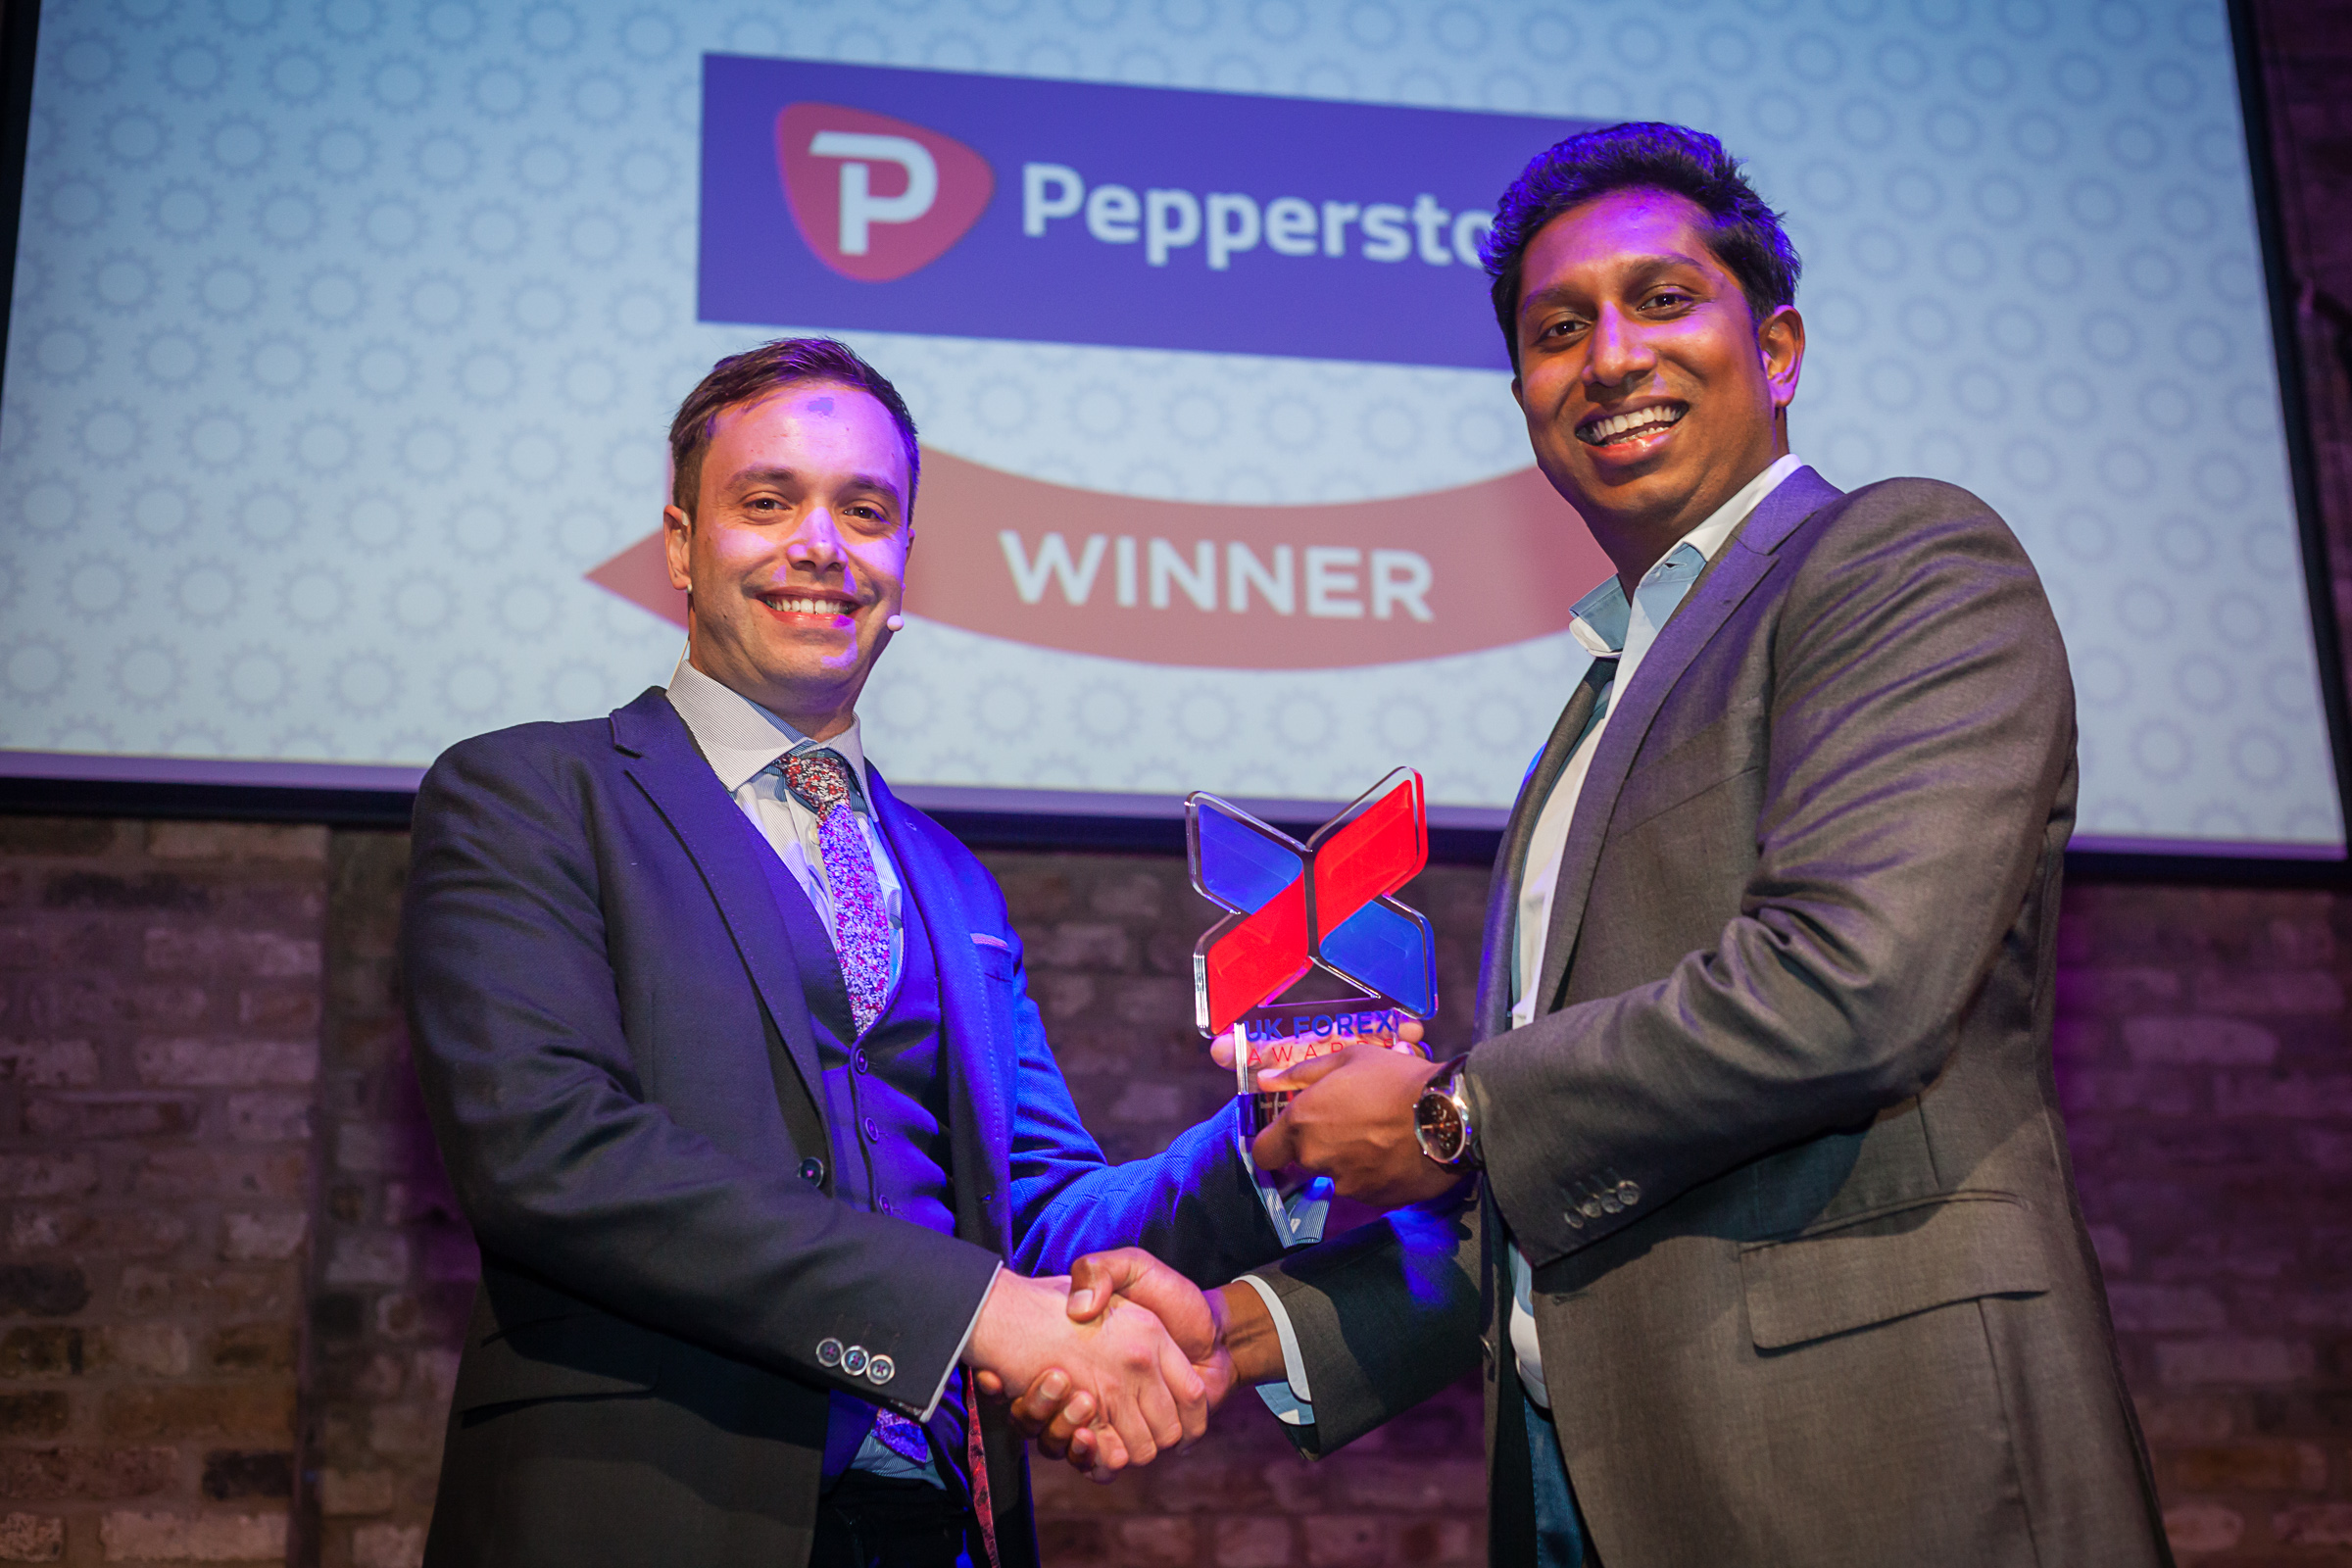 Three Wins for Pepperstone at the UK Forex Awards | Newswire